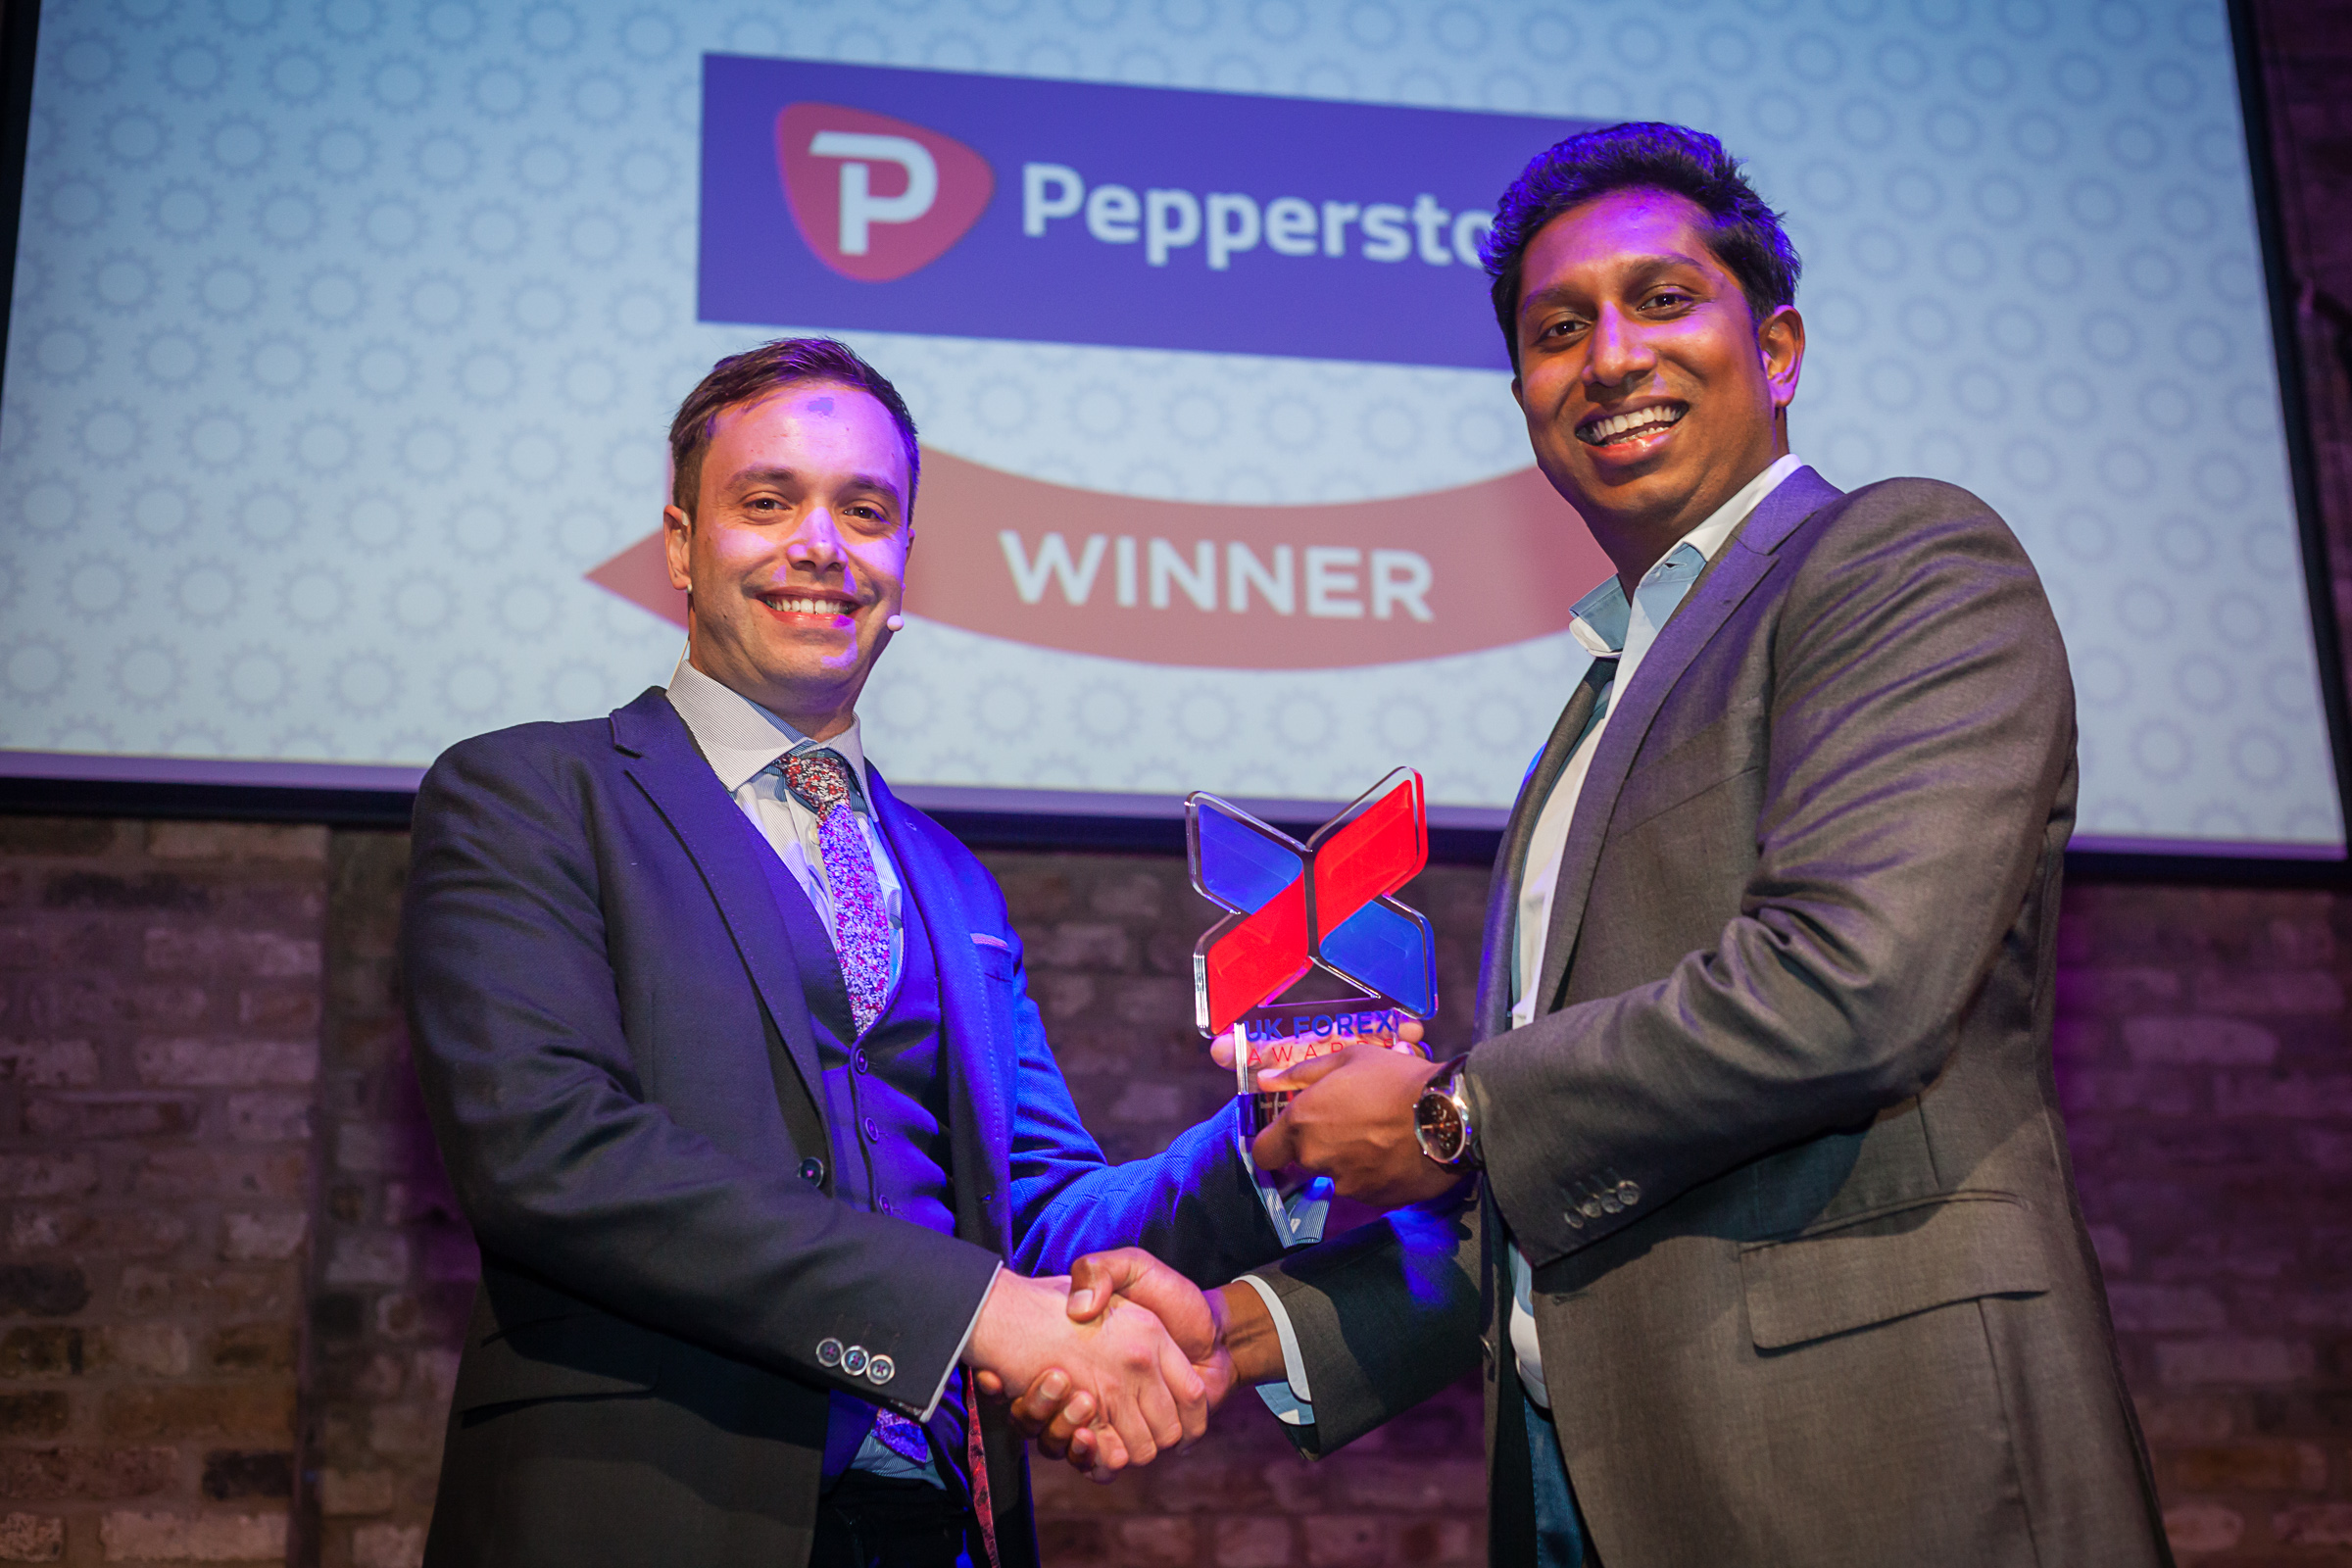 Three Wins for Pepperstone at the UK Forex Awards | Newswire